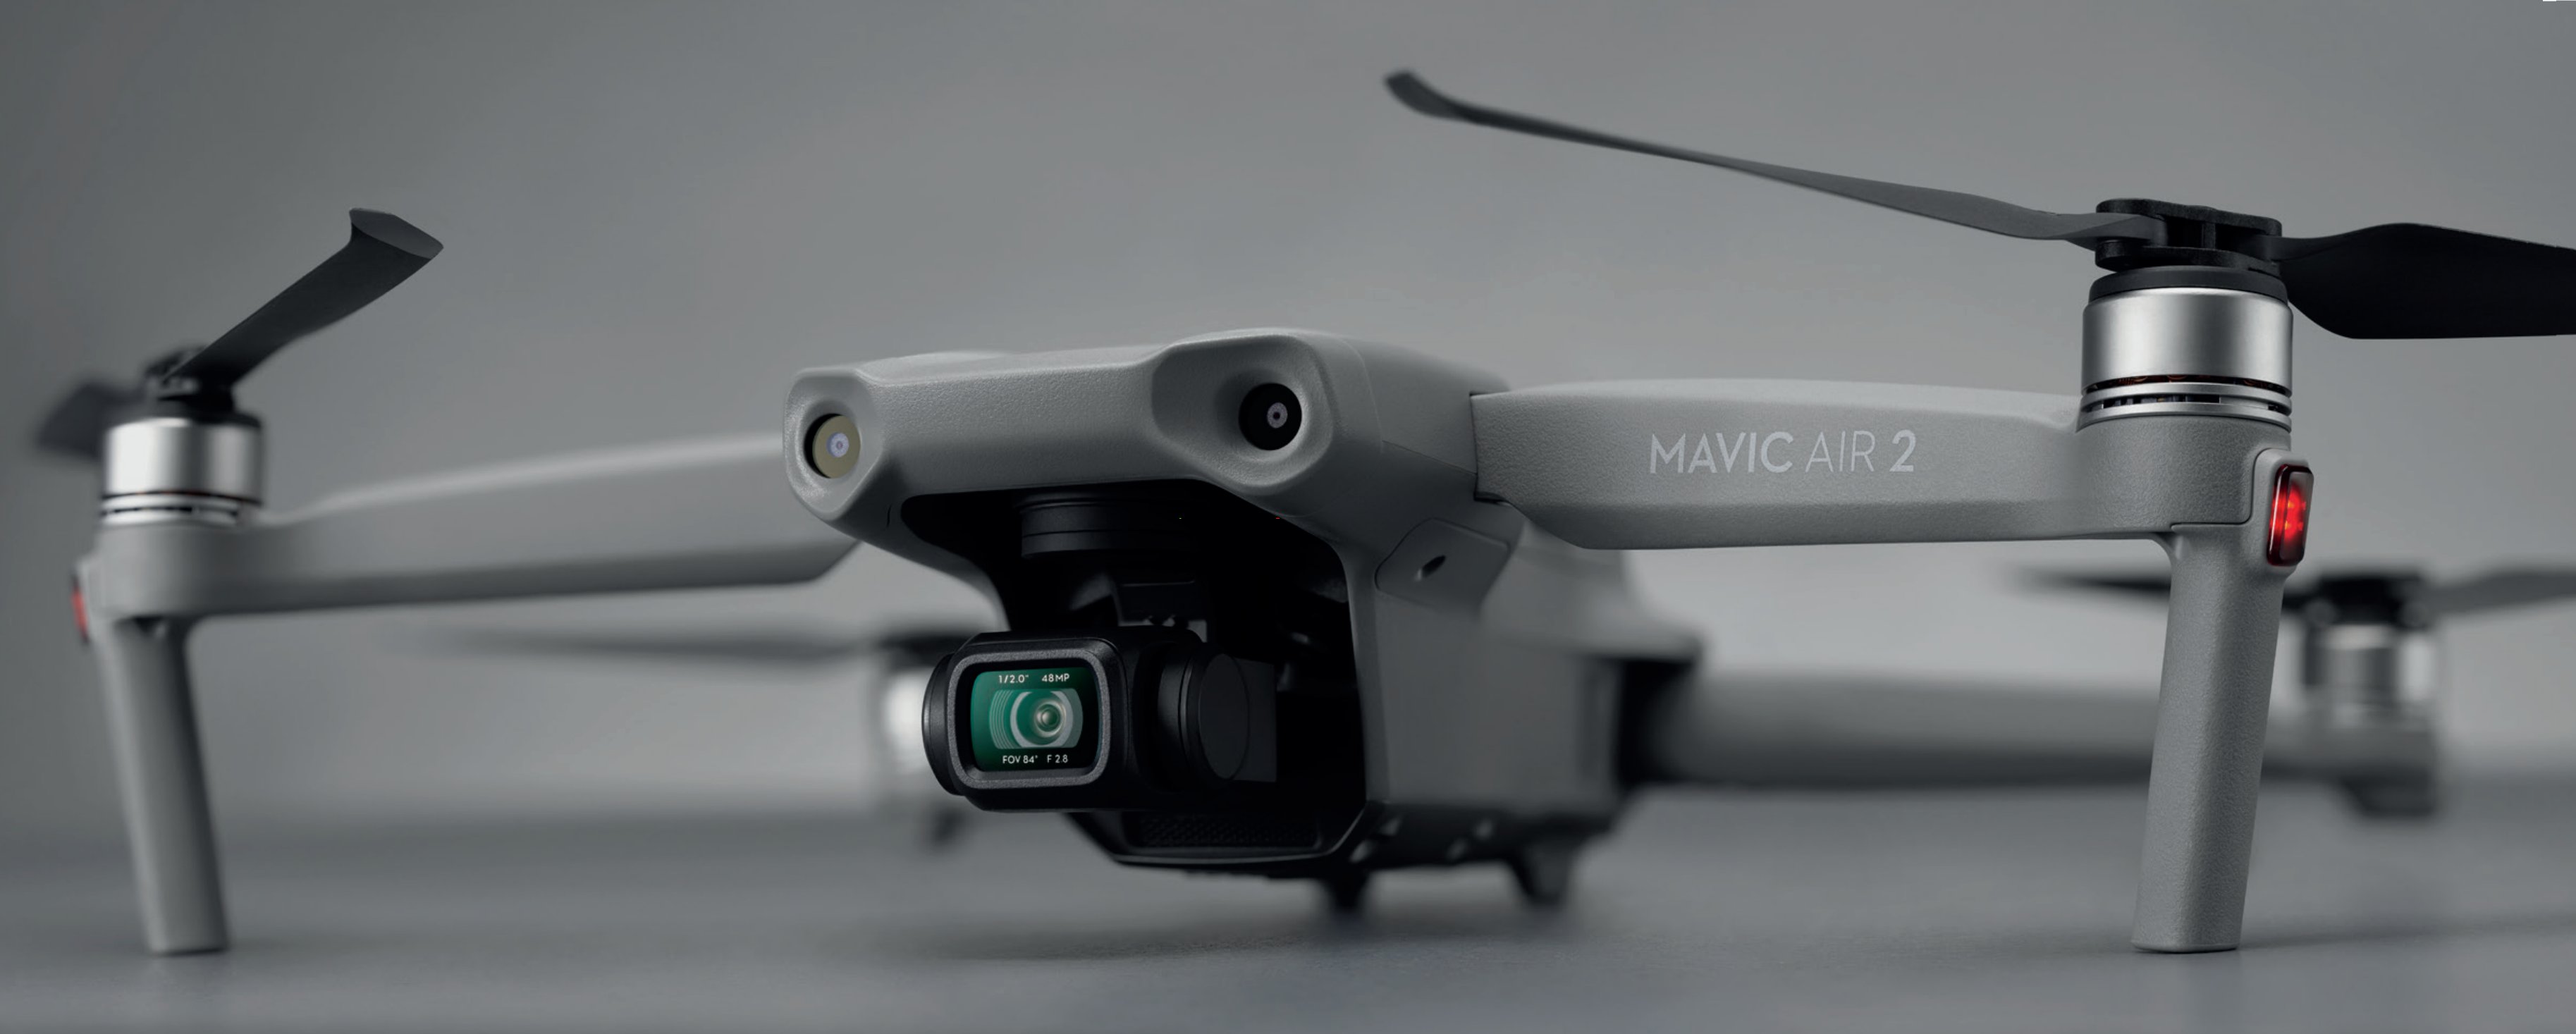 toda la vida Malgastar buscar DJI Mavic Air 2: Official images of the new drone and accessories leak  ahead of imminent release - NotebookCheck.net News